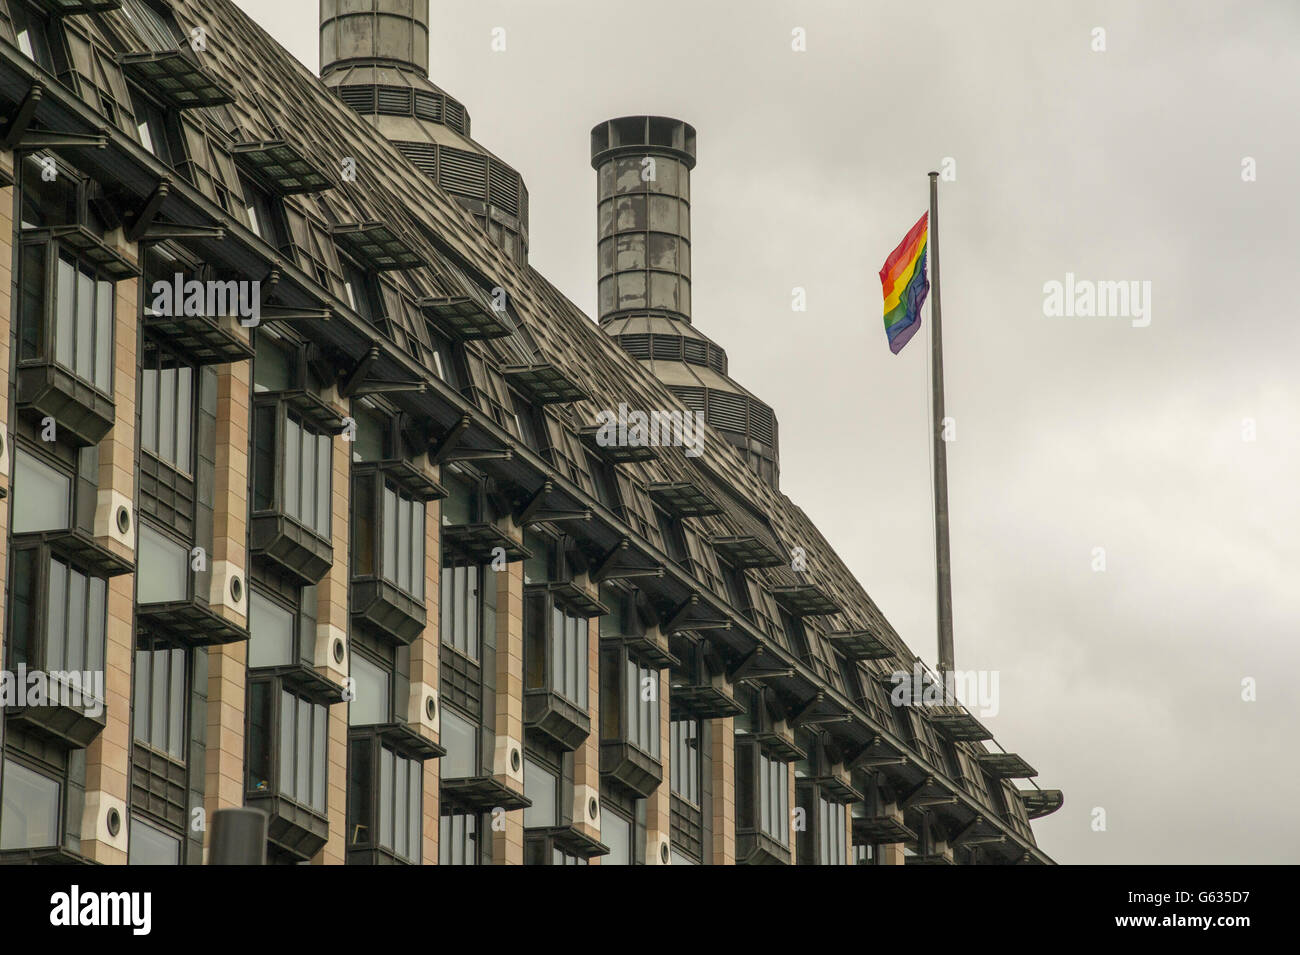 Parliament building Portcullis House in London flying the Rainbow flag to celebrate Pride week 2016 from June 10-26 Stock Photo